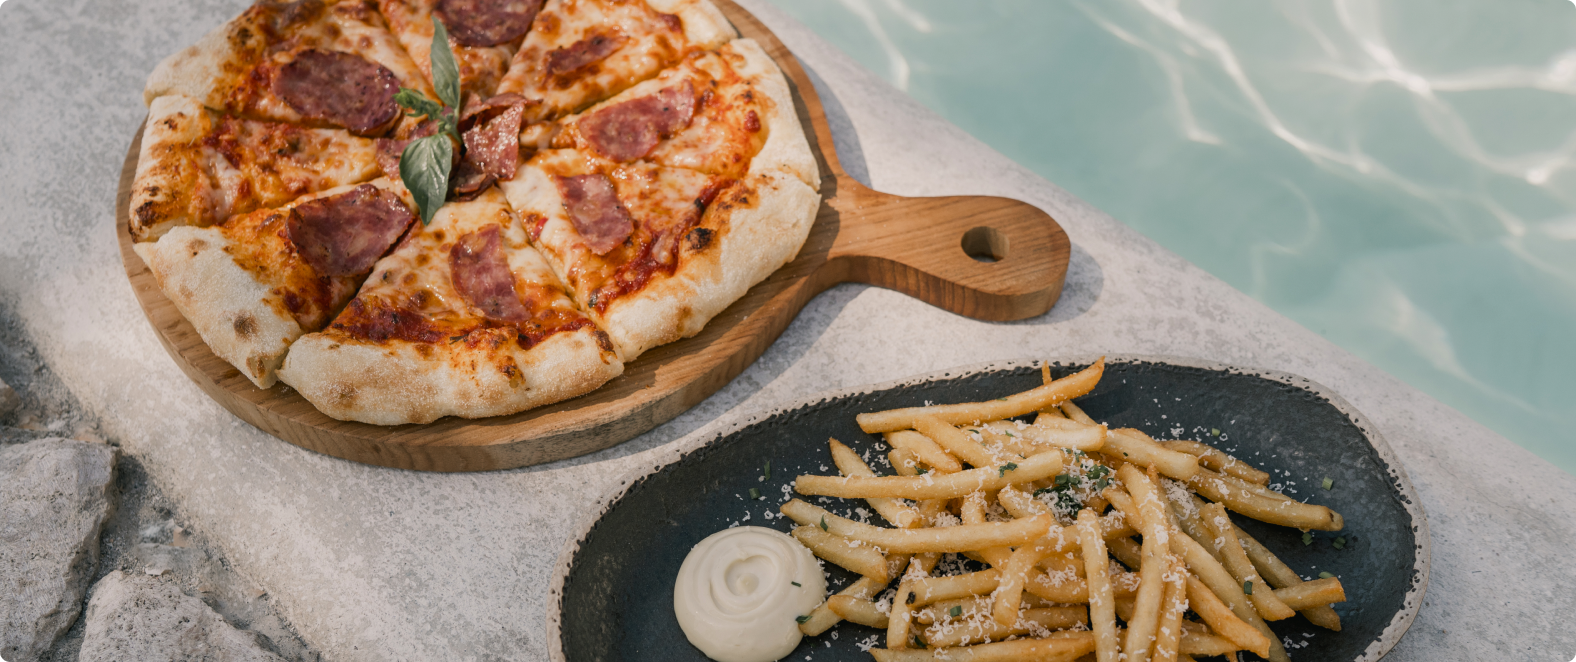 a pizza and fries on a plate